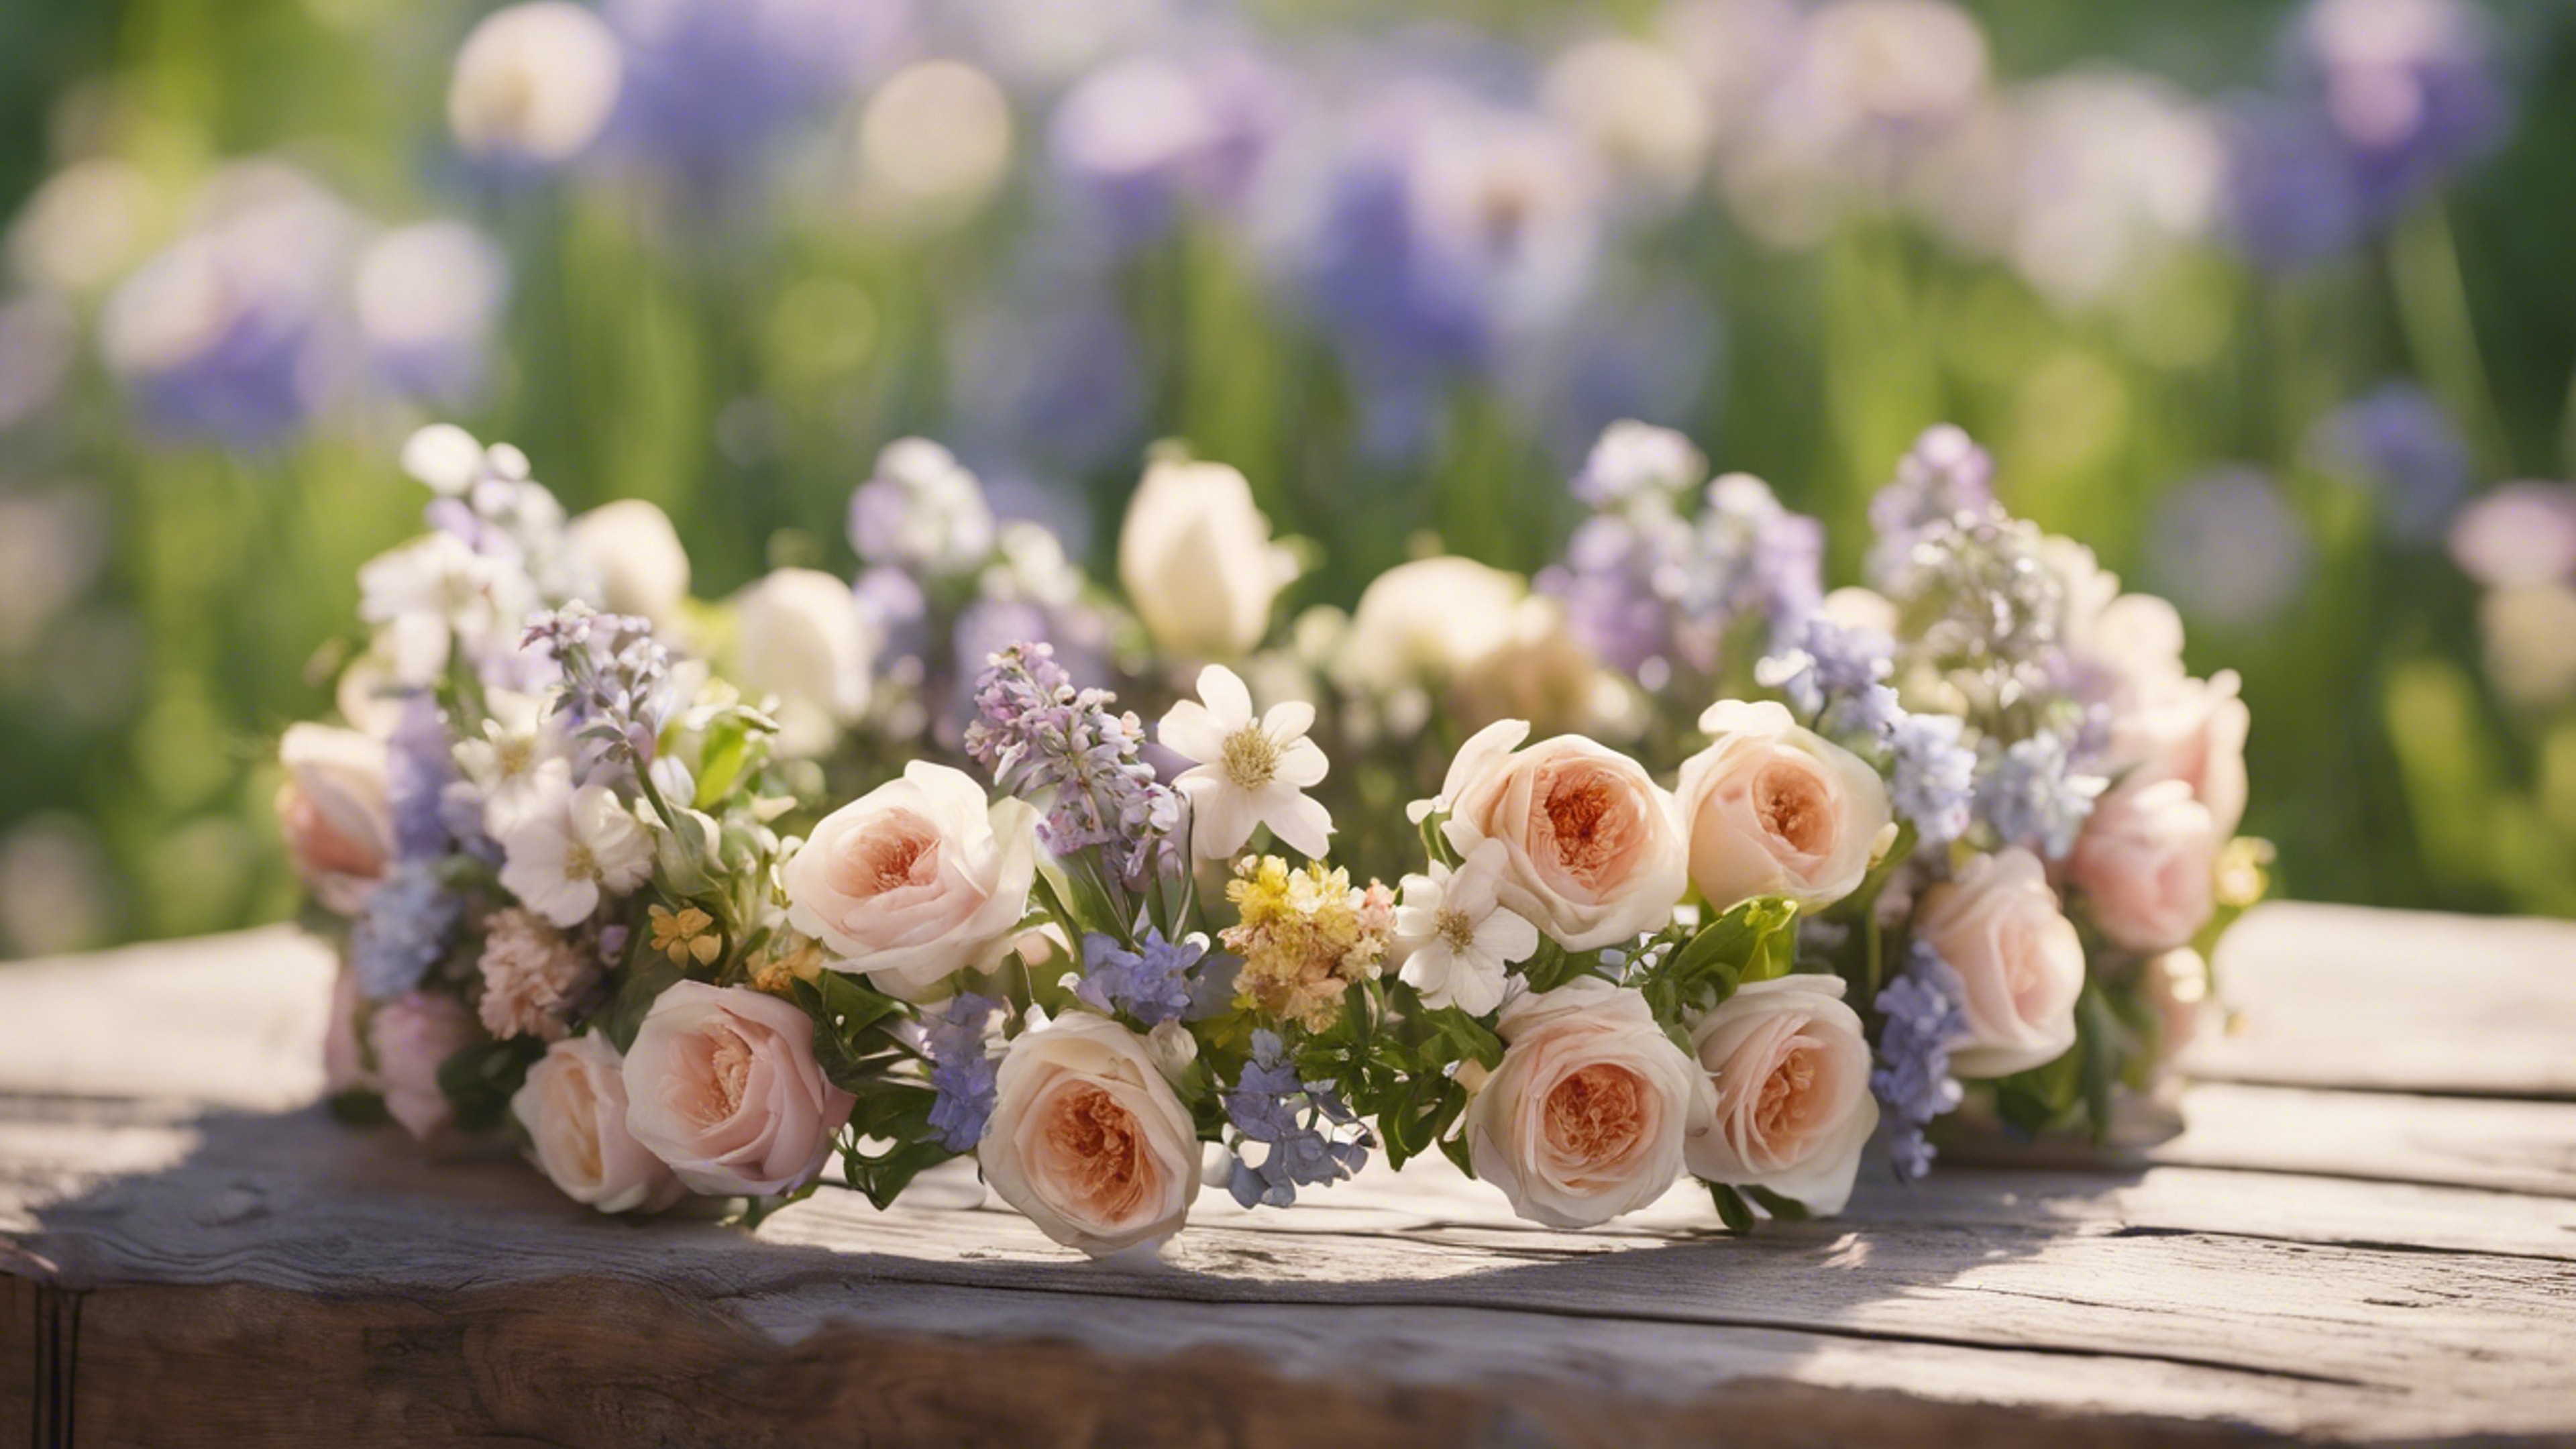 A crown made of fresh spring flowers on a wooden table outdoors. Ταπετσαρία[d5115d6a32bf47389ae3]